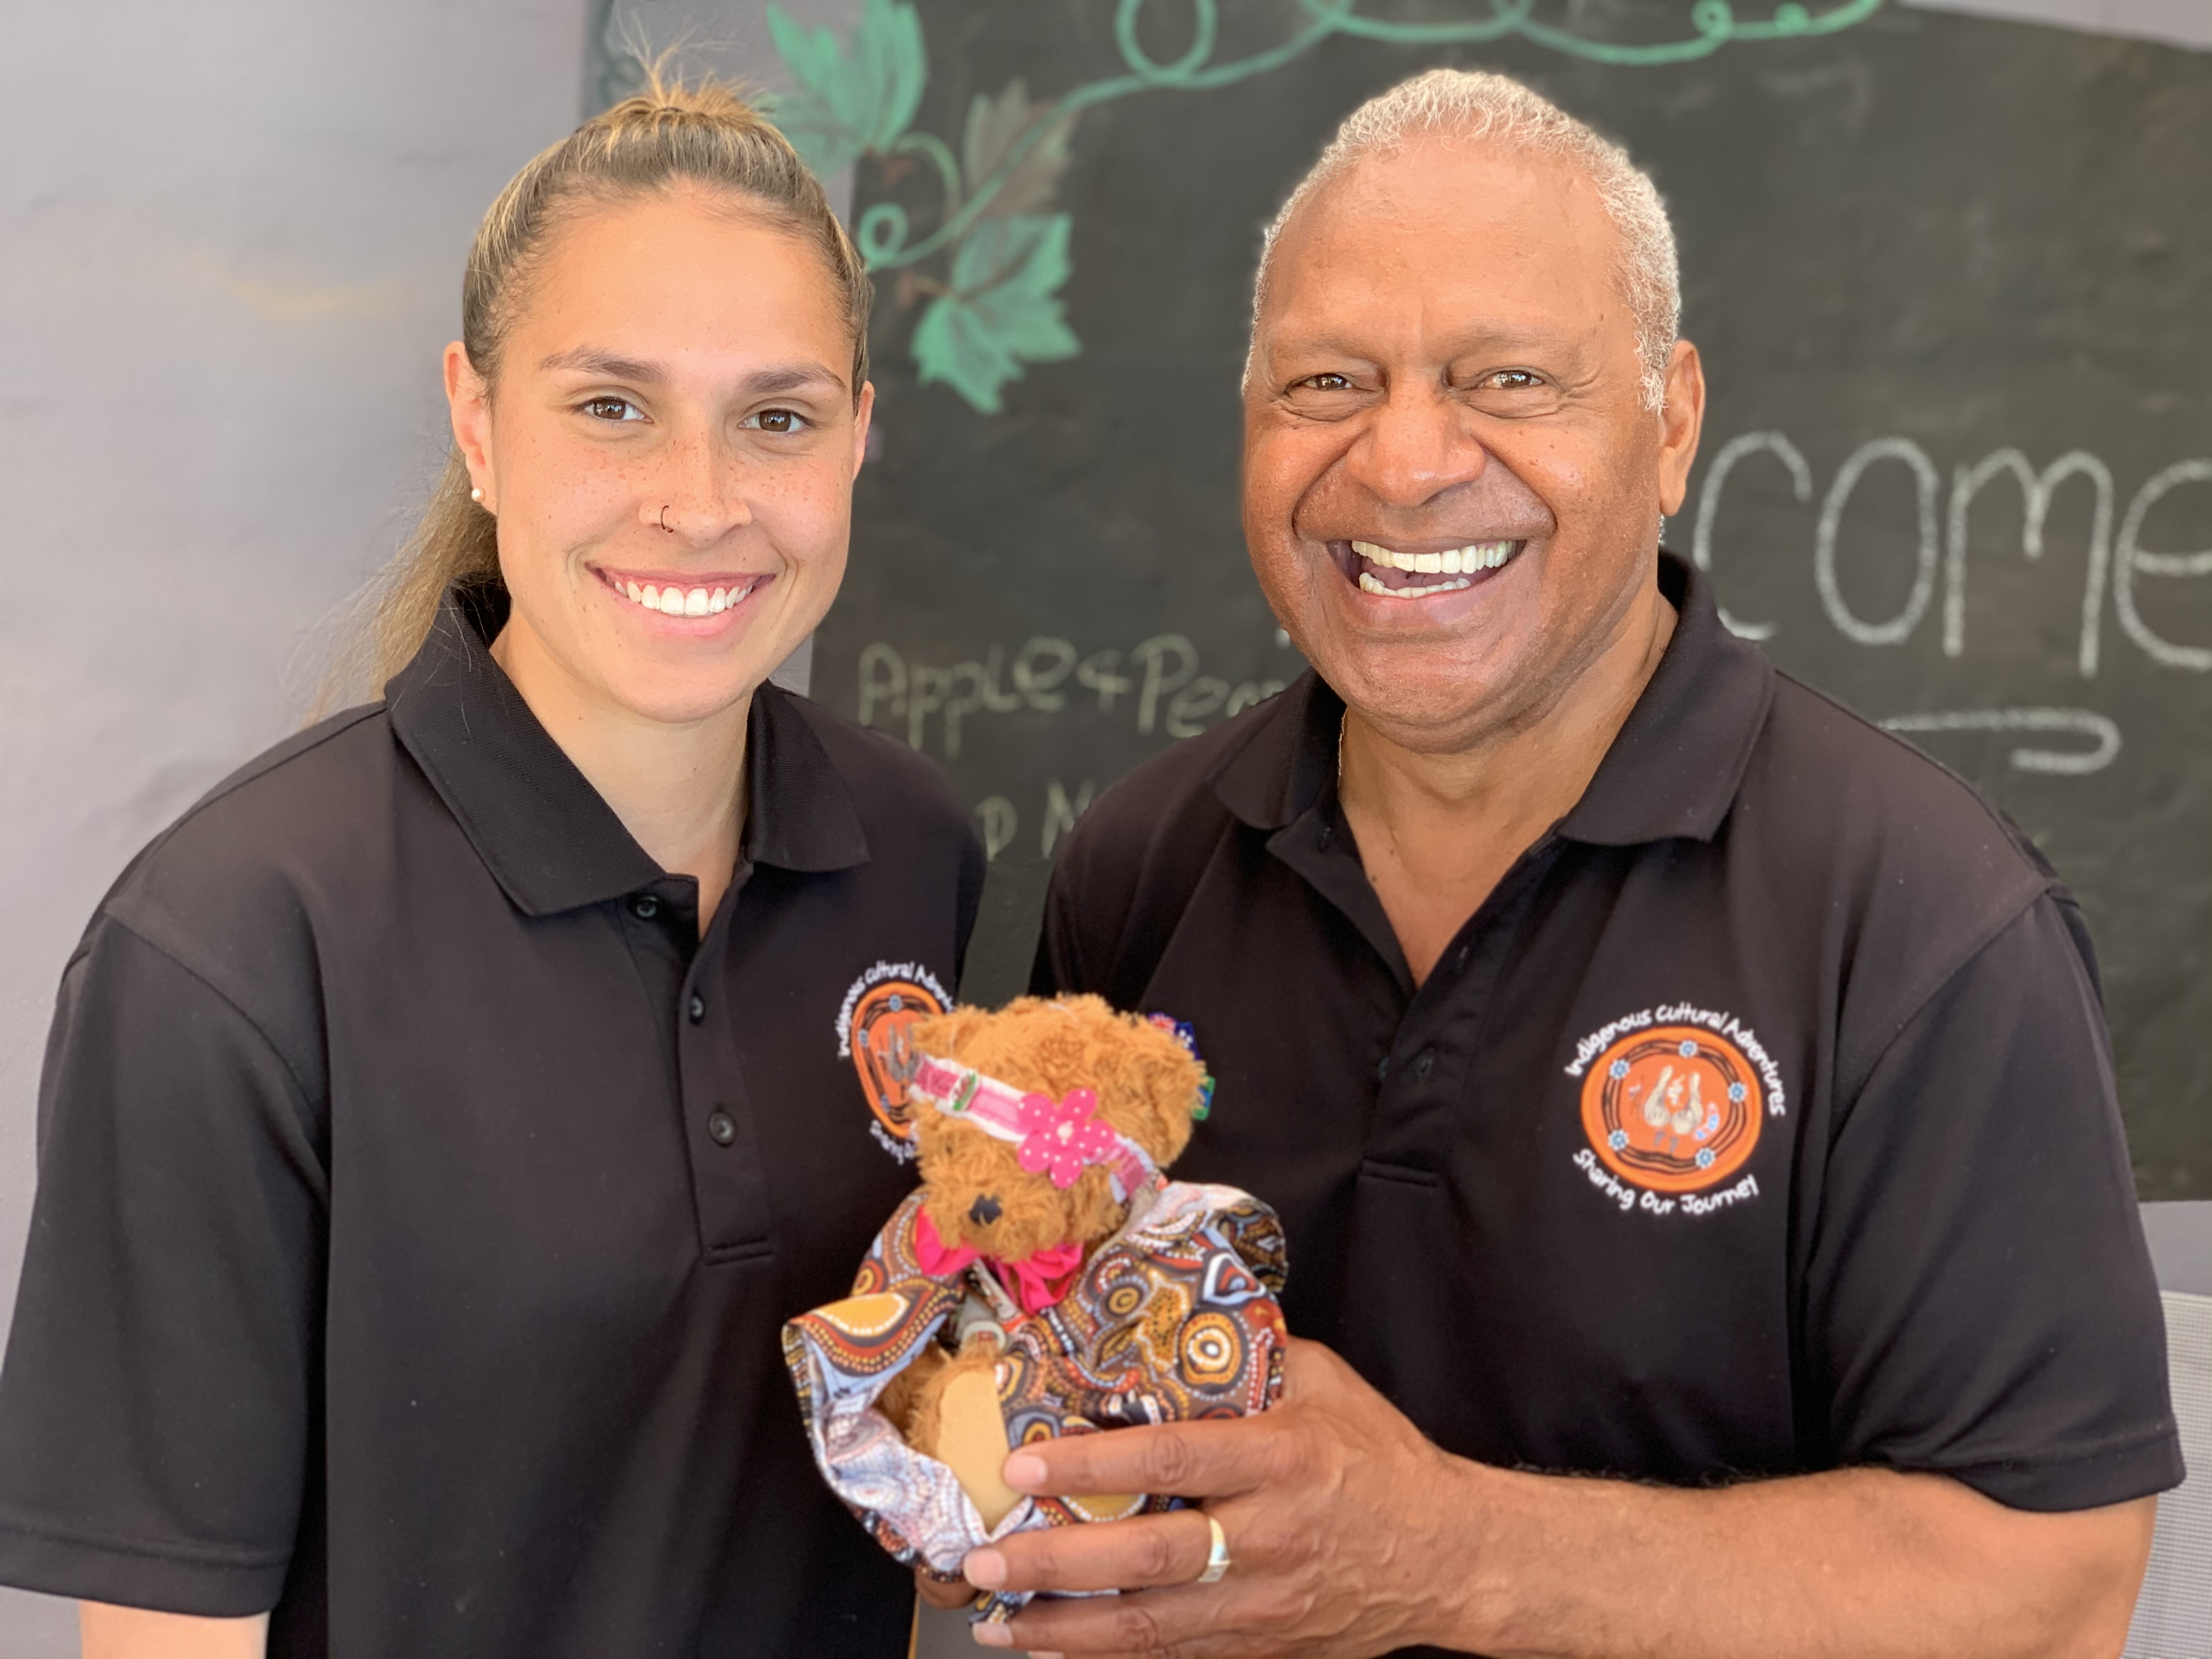 2 First Nation guides holding a teddy bear